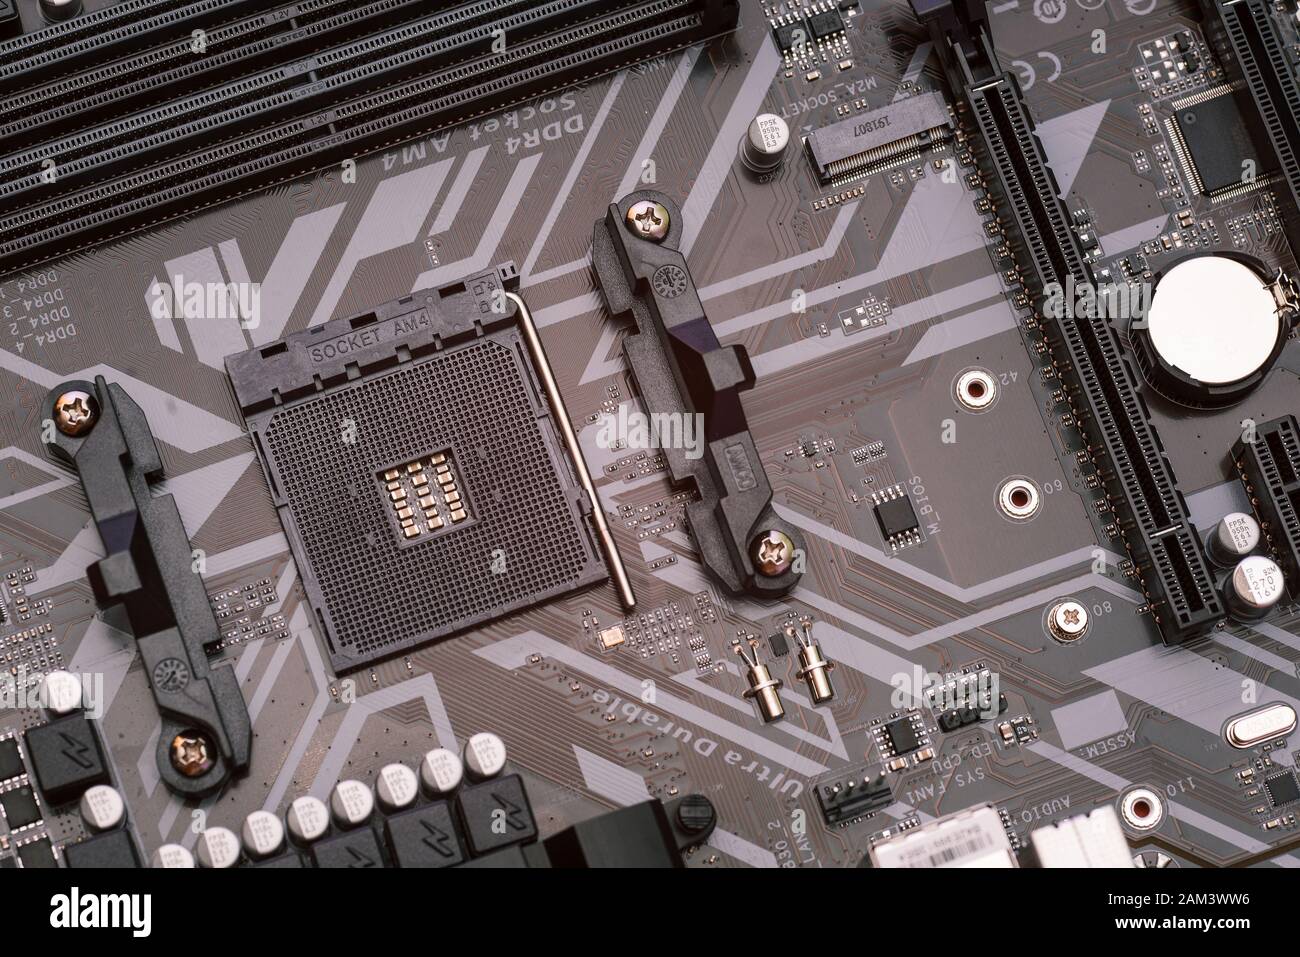 Computer motherboard without processor. Assembling parts for a server or home computer. Empty space for the processor and RAM. Stock Photo